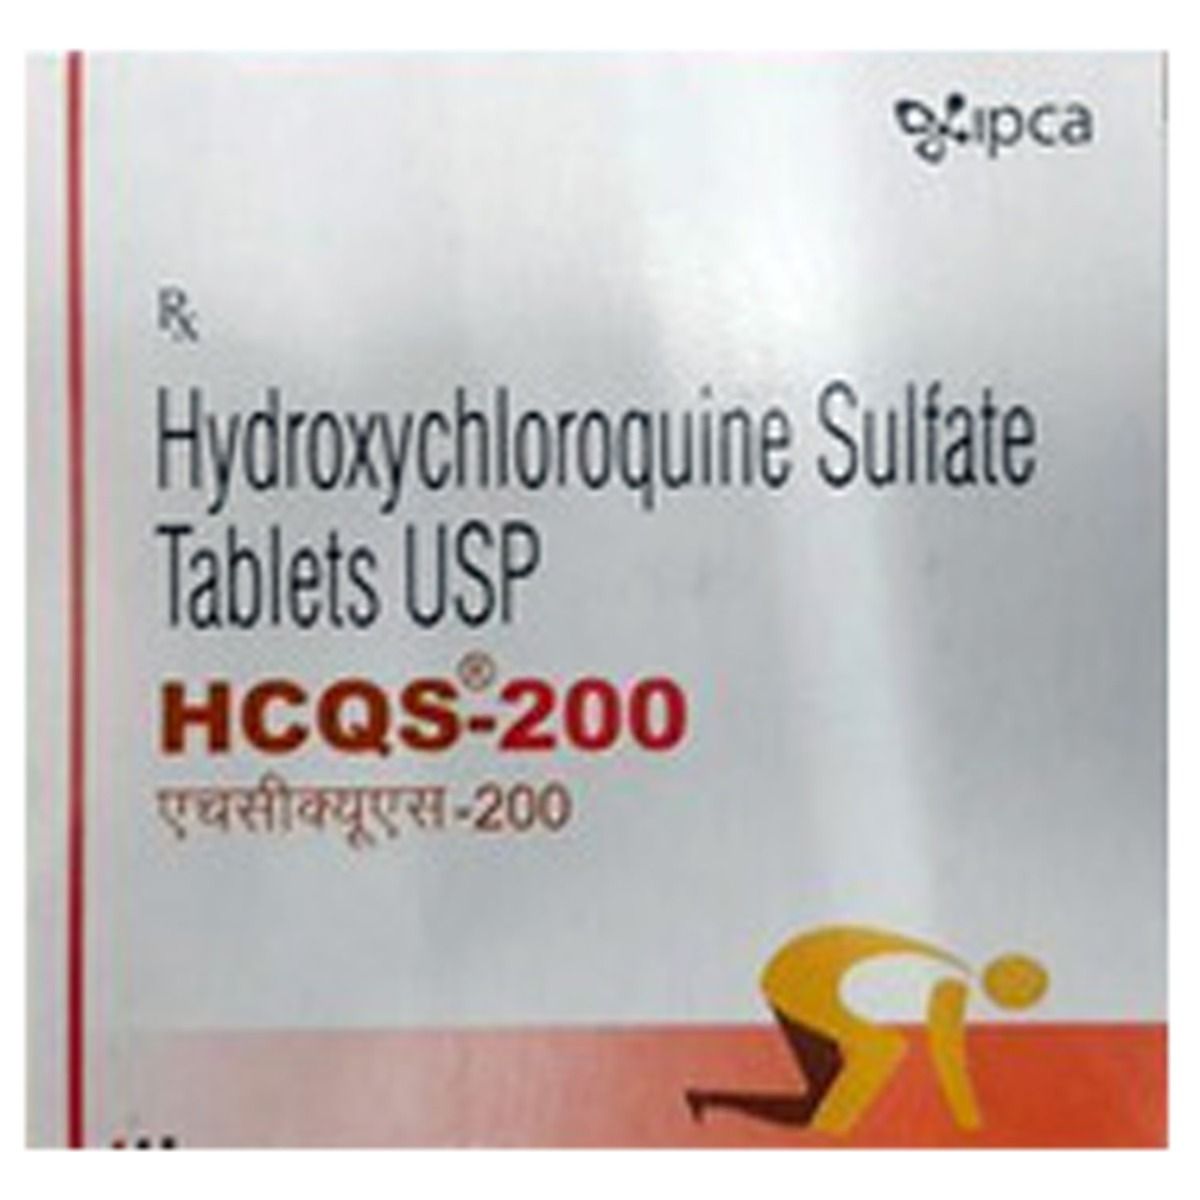 HCQS-200 Tablet 10's, Pack of 10 TABLETS